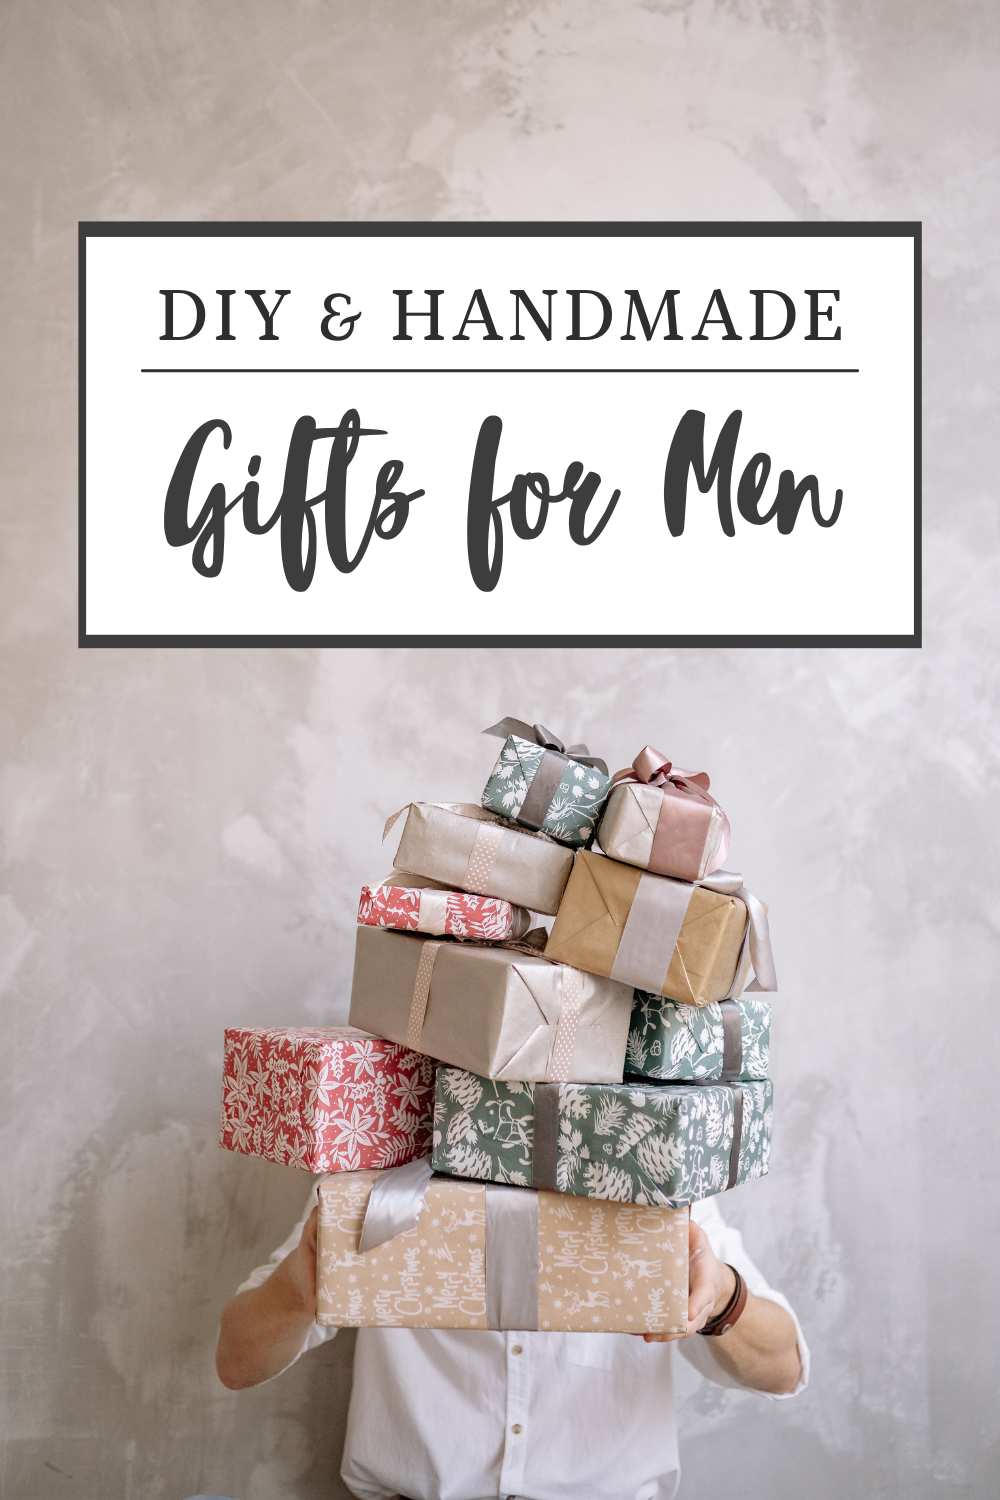 Clever DIY Handmade Gifts for Men